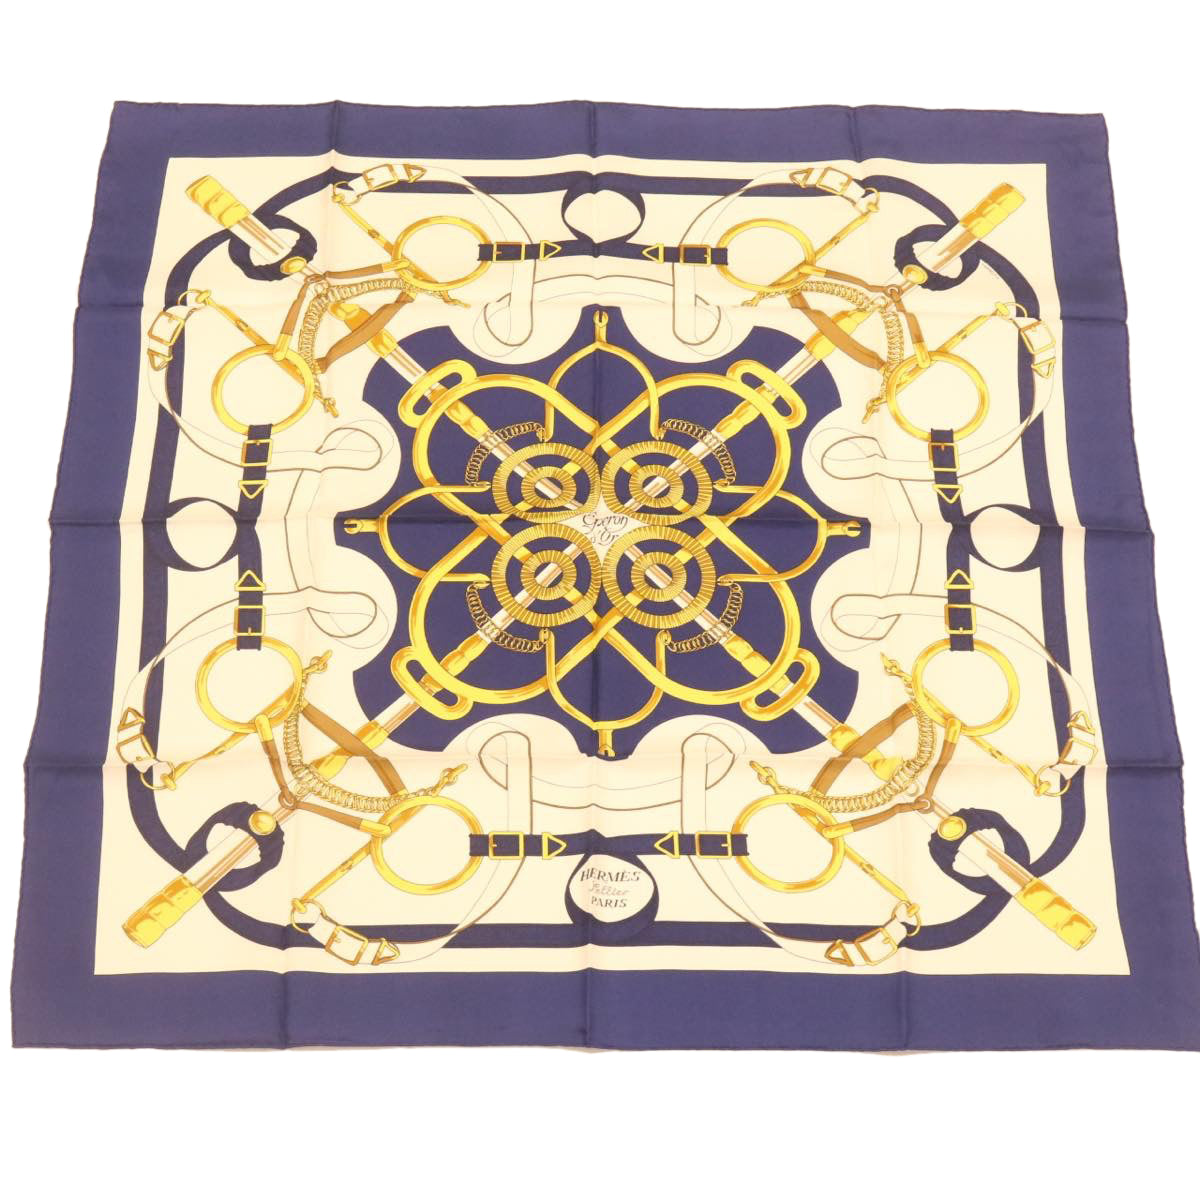 HERMES Carre90 Scarf ""EPERON D'OR"" Silk Blue Auth am373b